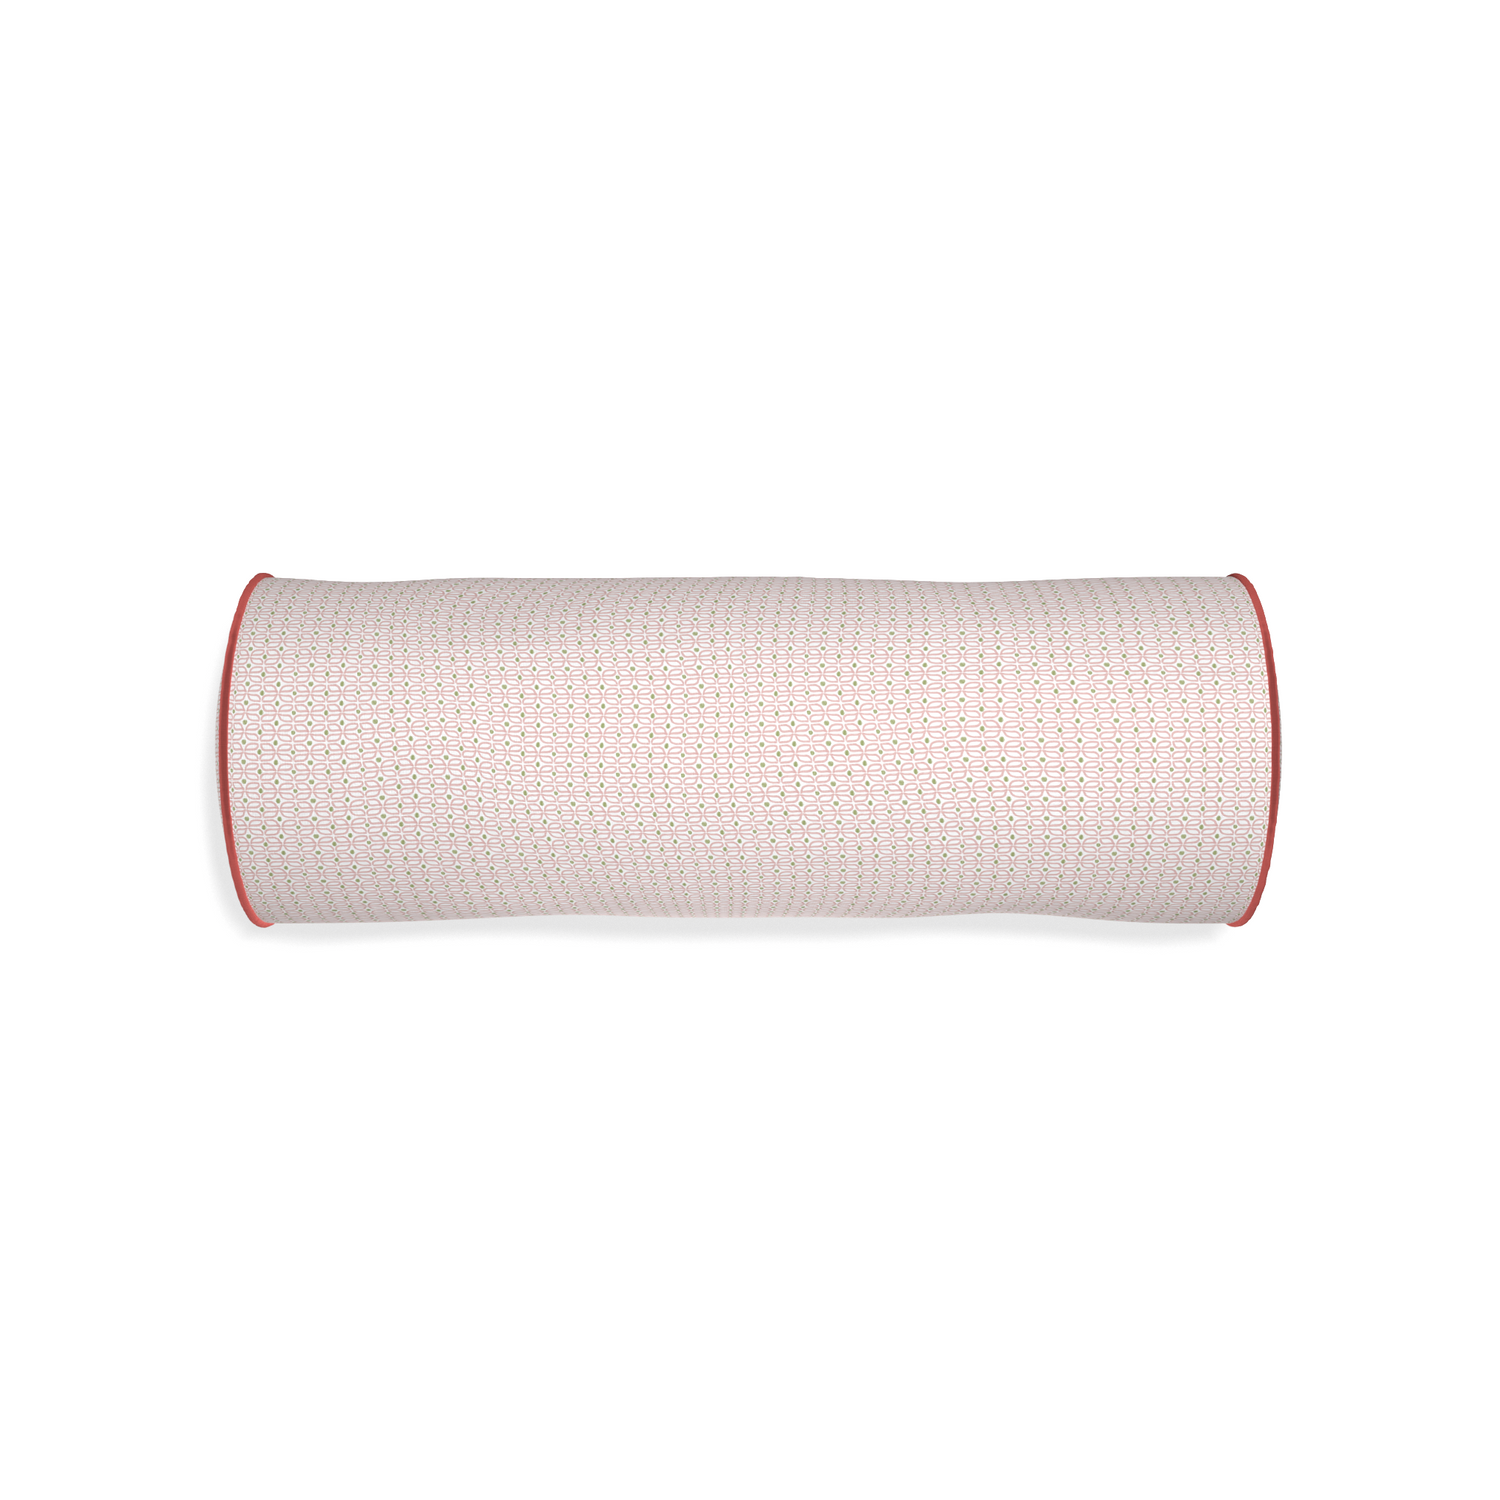 Bolster loomi pink custom pillow with c piping on white background